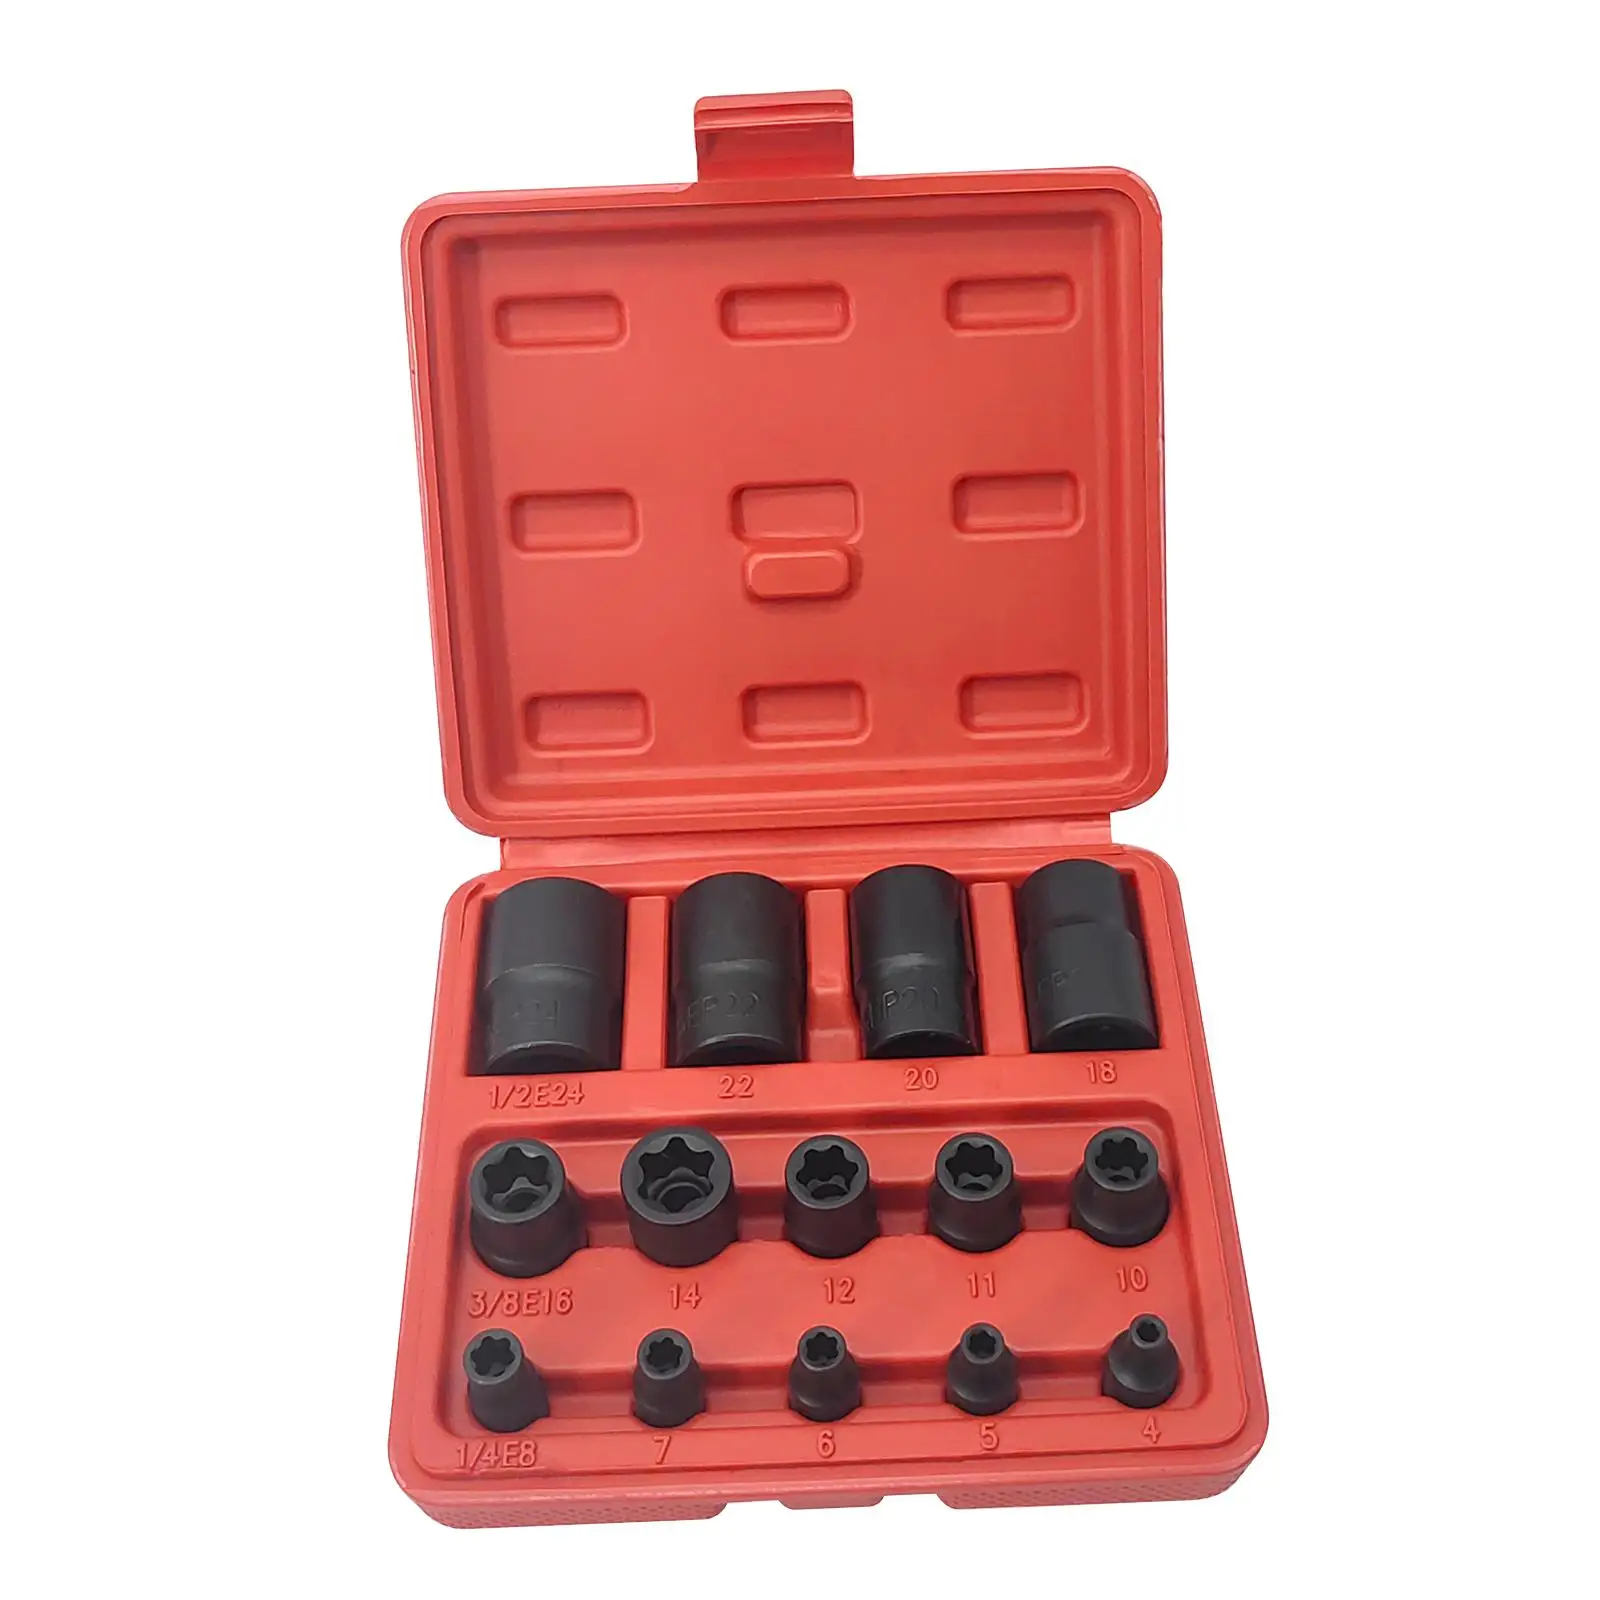  Set, 1/4inch -, 3/8inch EP11-Ep16, with Carry Case, Portable External  Set, 1/2inch EP18-Ep2 Female  Set